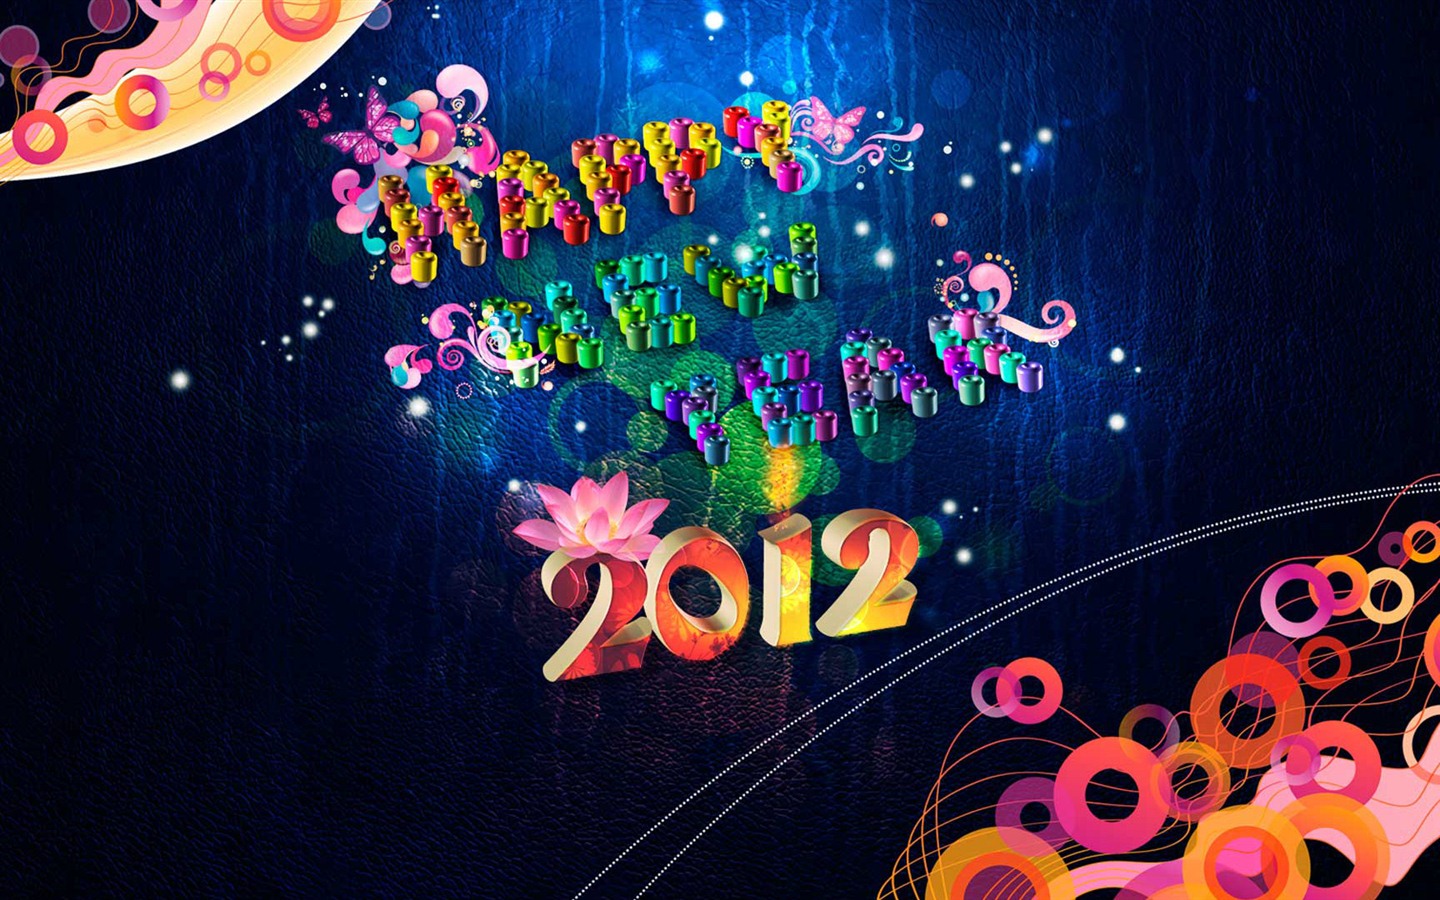 2012 New Year wallpapers (2) #3 - 1440x900